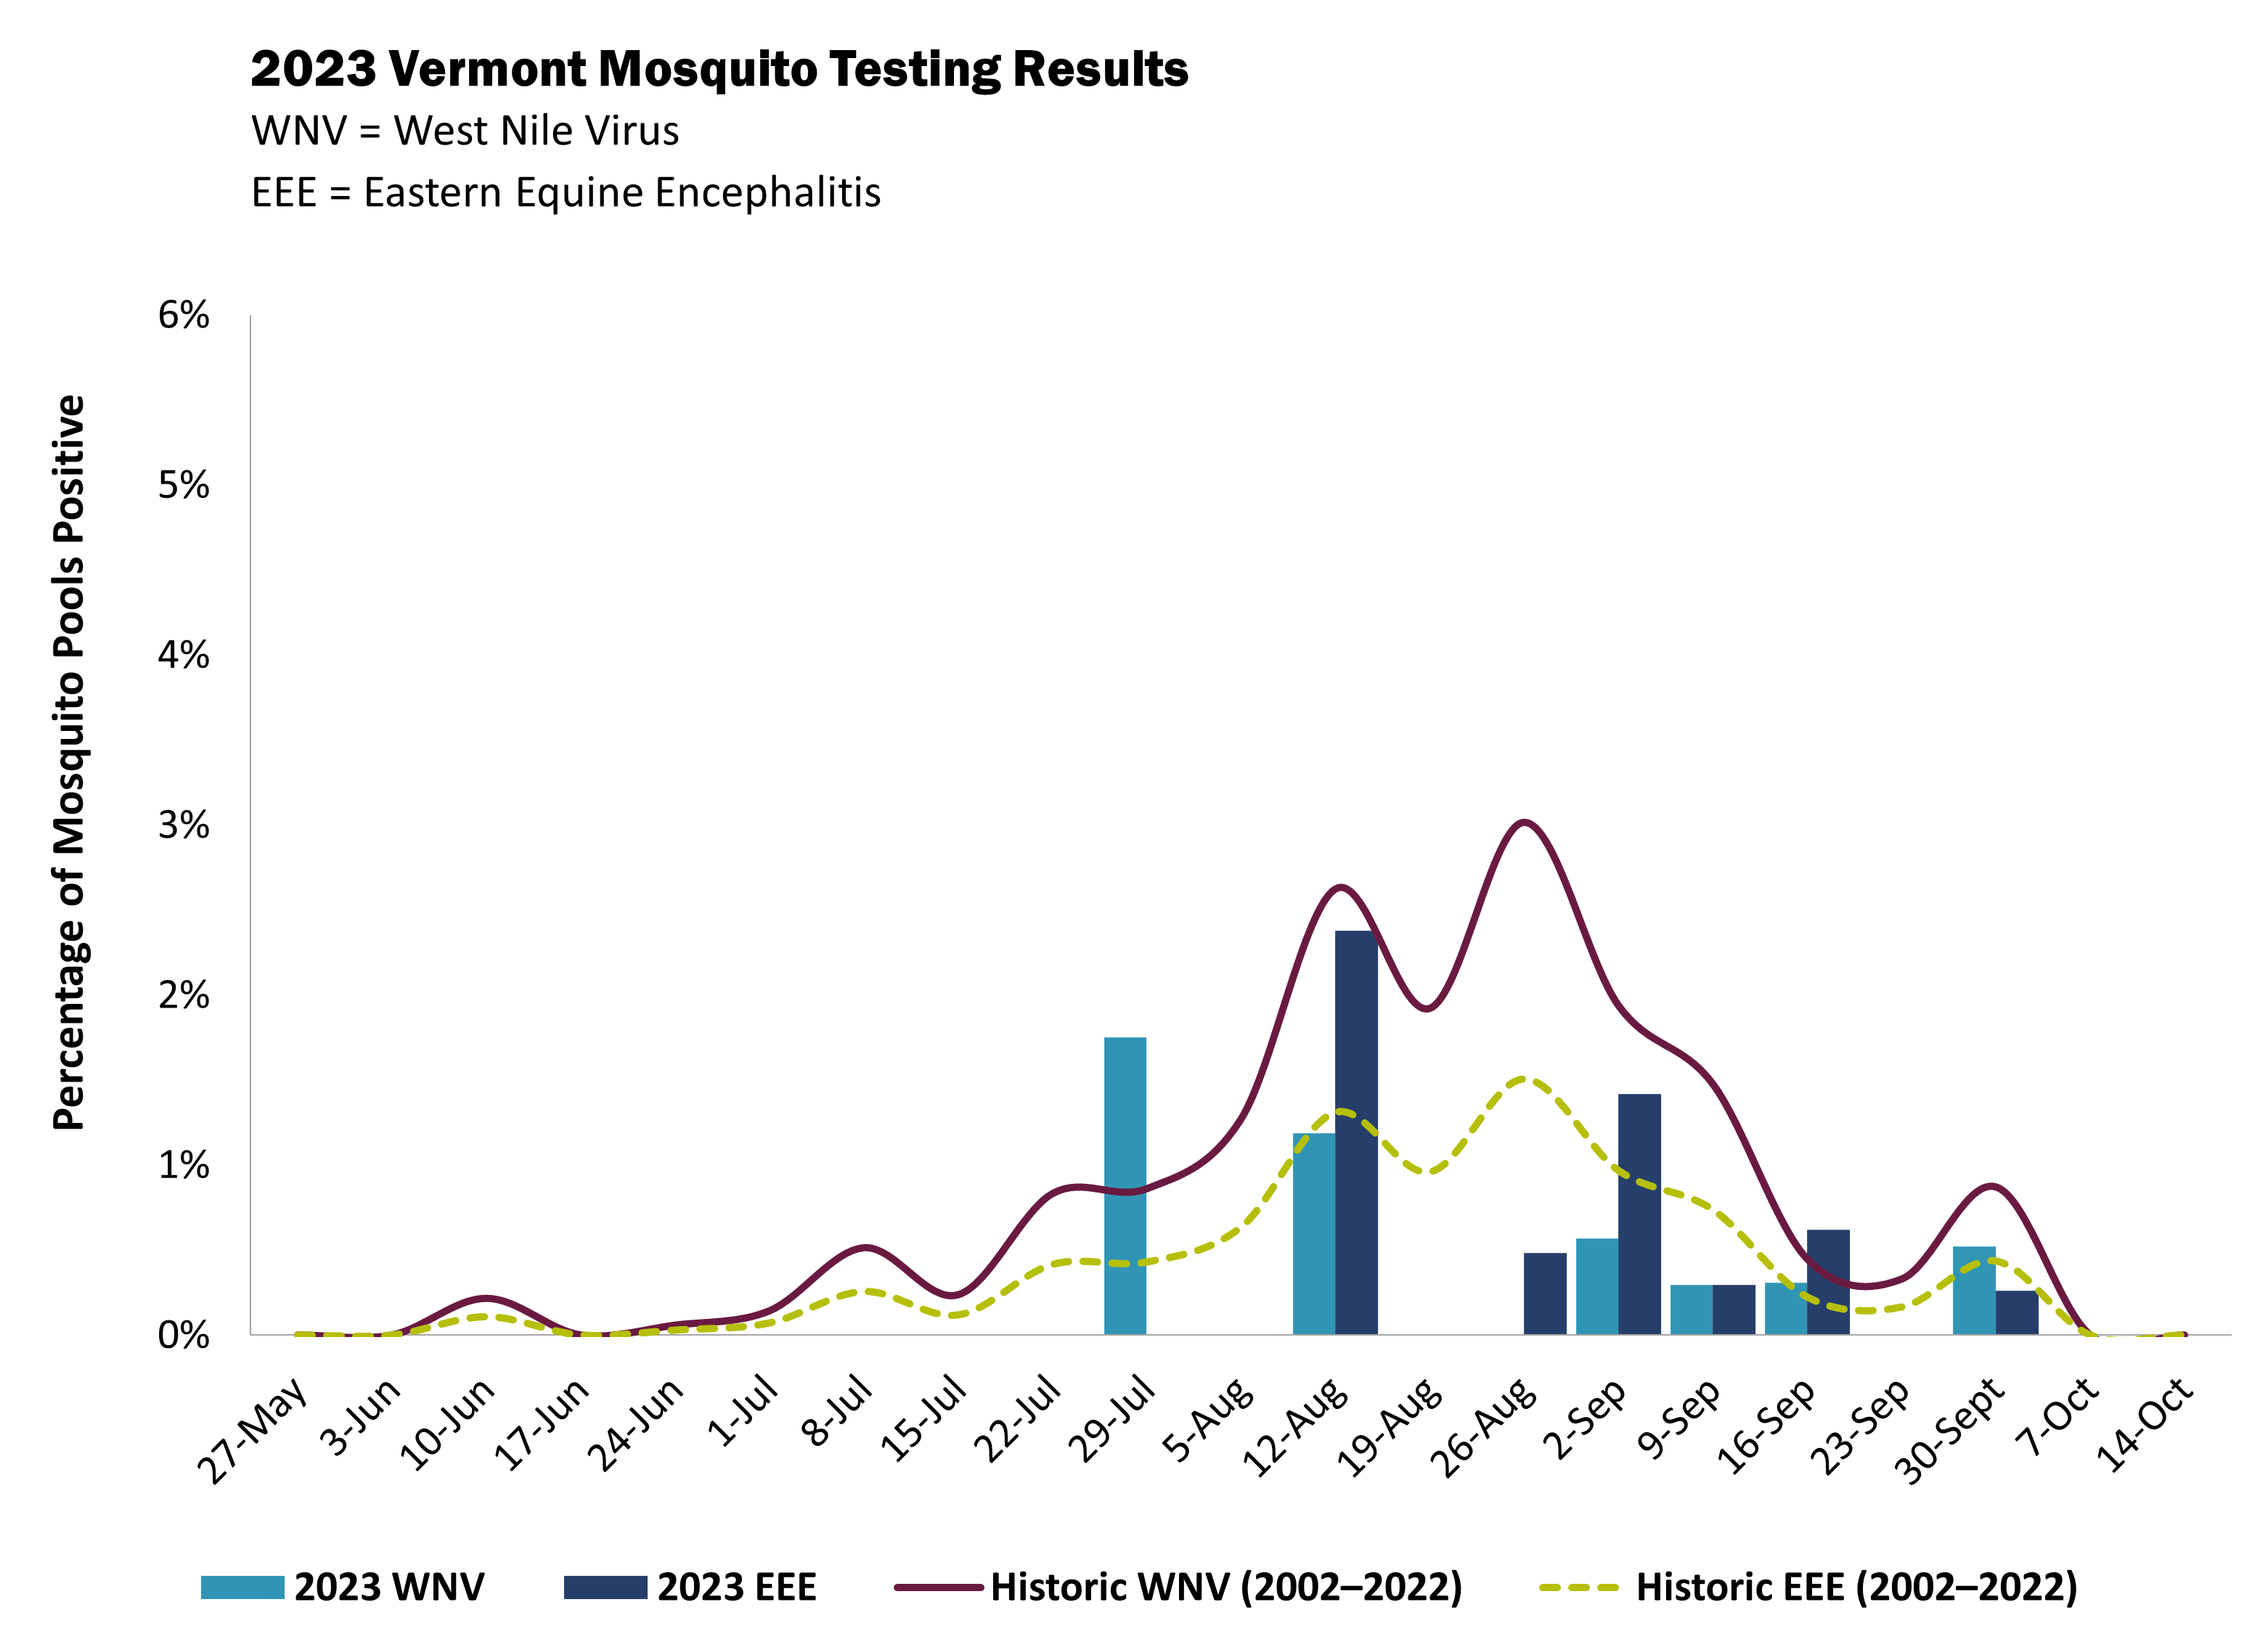 Graph depicting 2023 Vermont Mosquito Testing Results for West Nile Virus and Eastern equine encephalitis against historic WNV/EEE trend lines